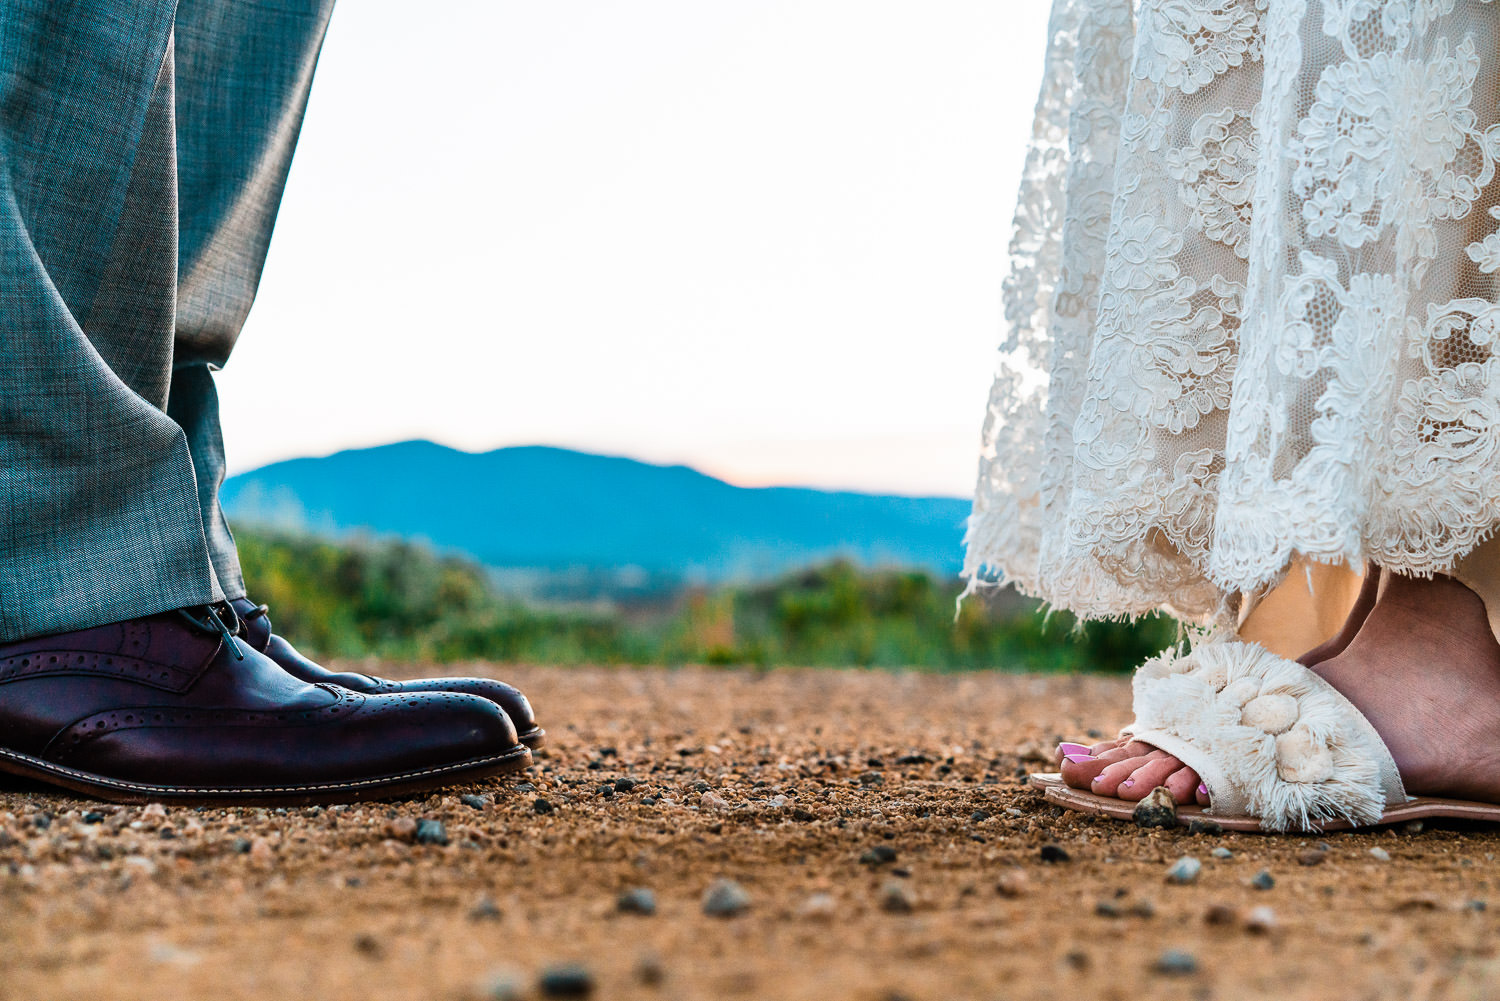 Best of 2020 Elopements | Run Wild With Me Photography